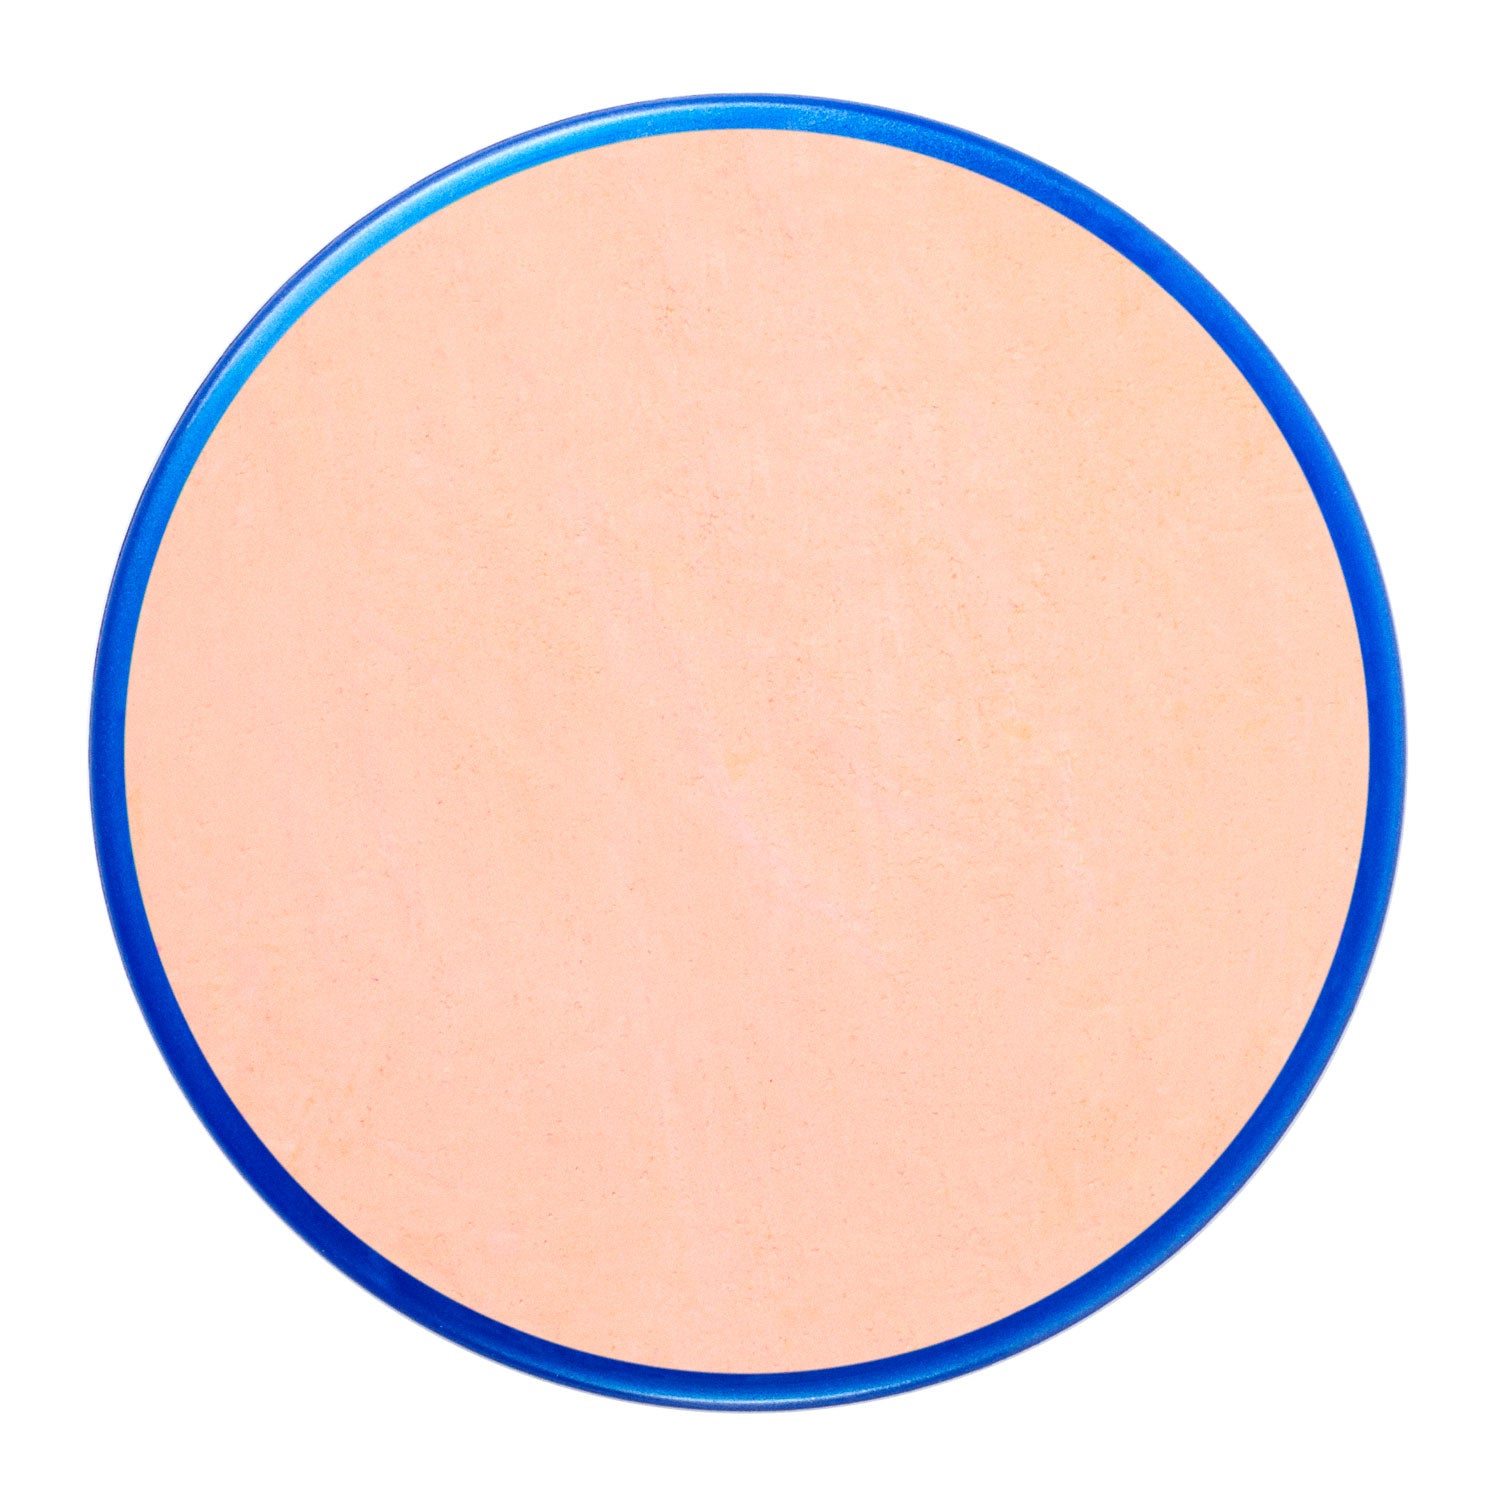 Snazaroo Face Paint - Complexion Pink